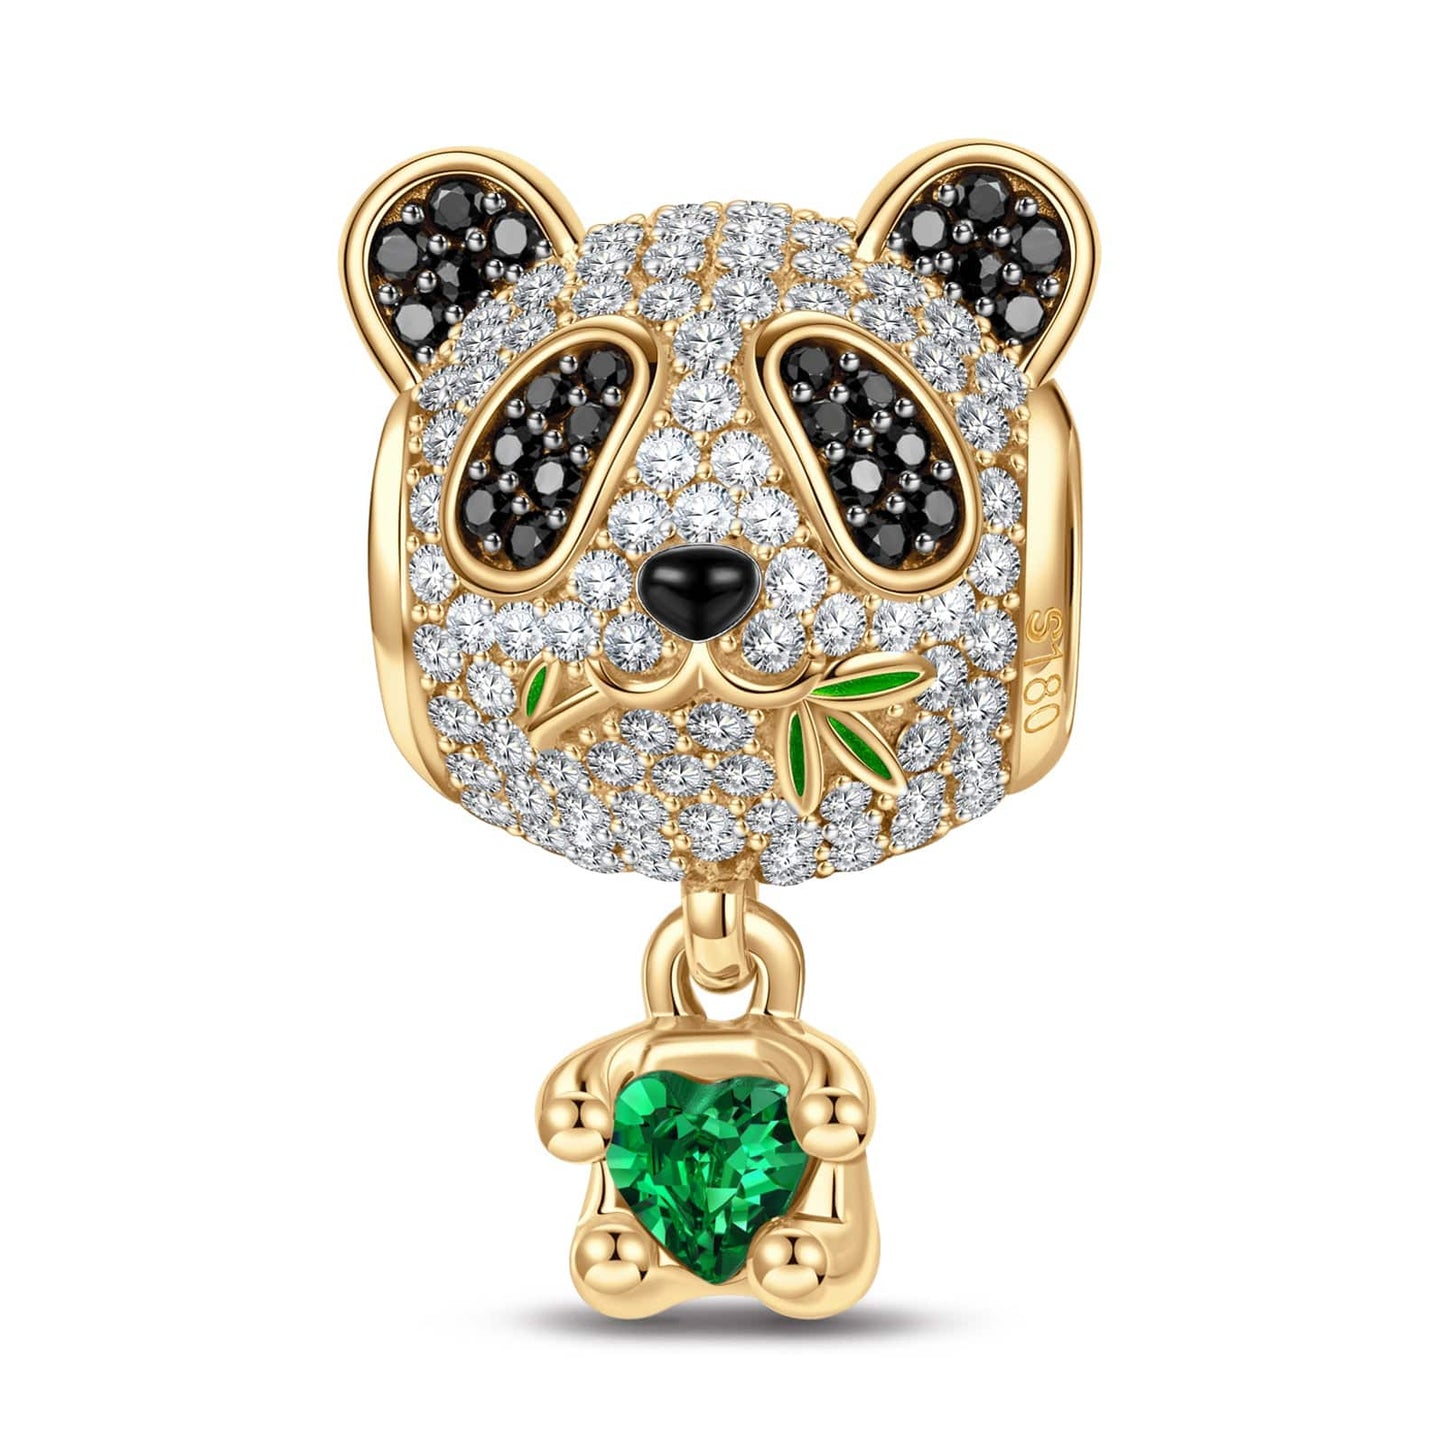 Love Hug Panda Tarnish-resistant Silver Animal Charms With Enamel In 14K Gold Plated